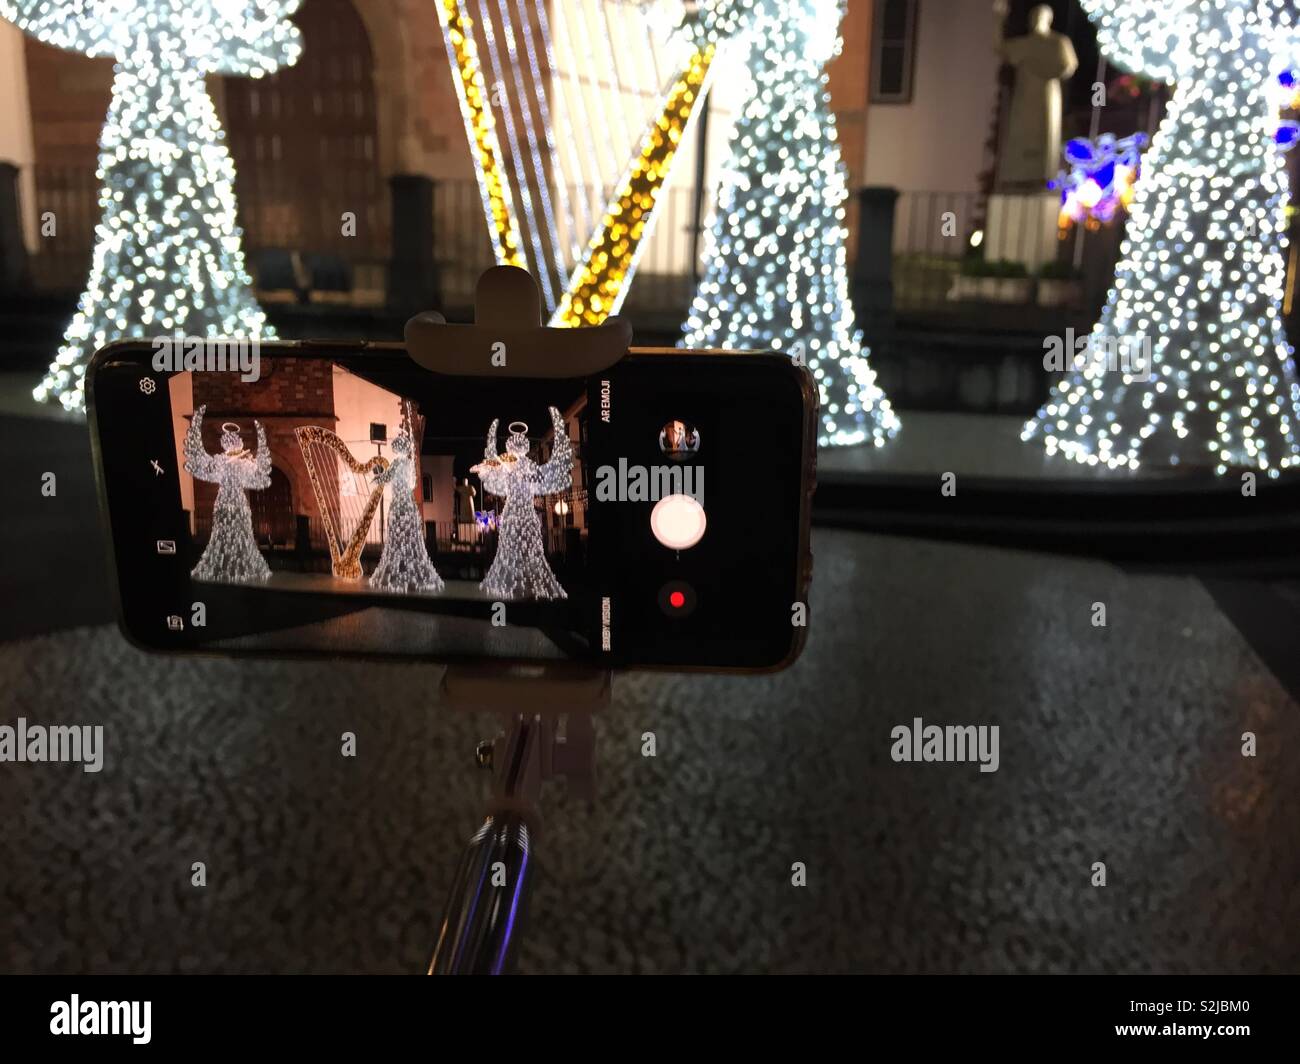 Using a mobile phone to photograph a Christmas lighting display of three angels. Stock Photo